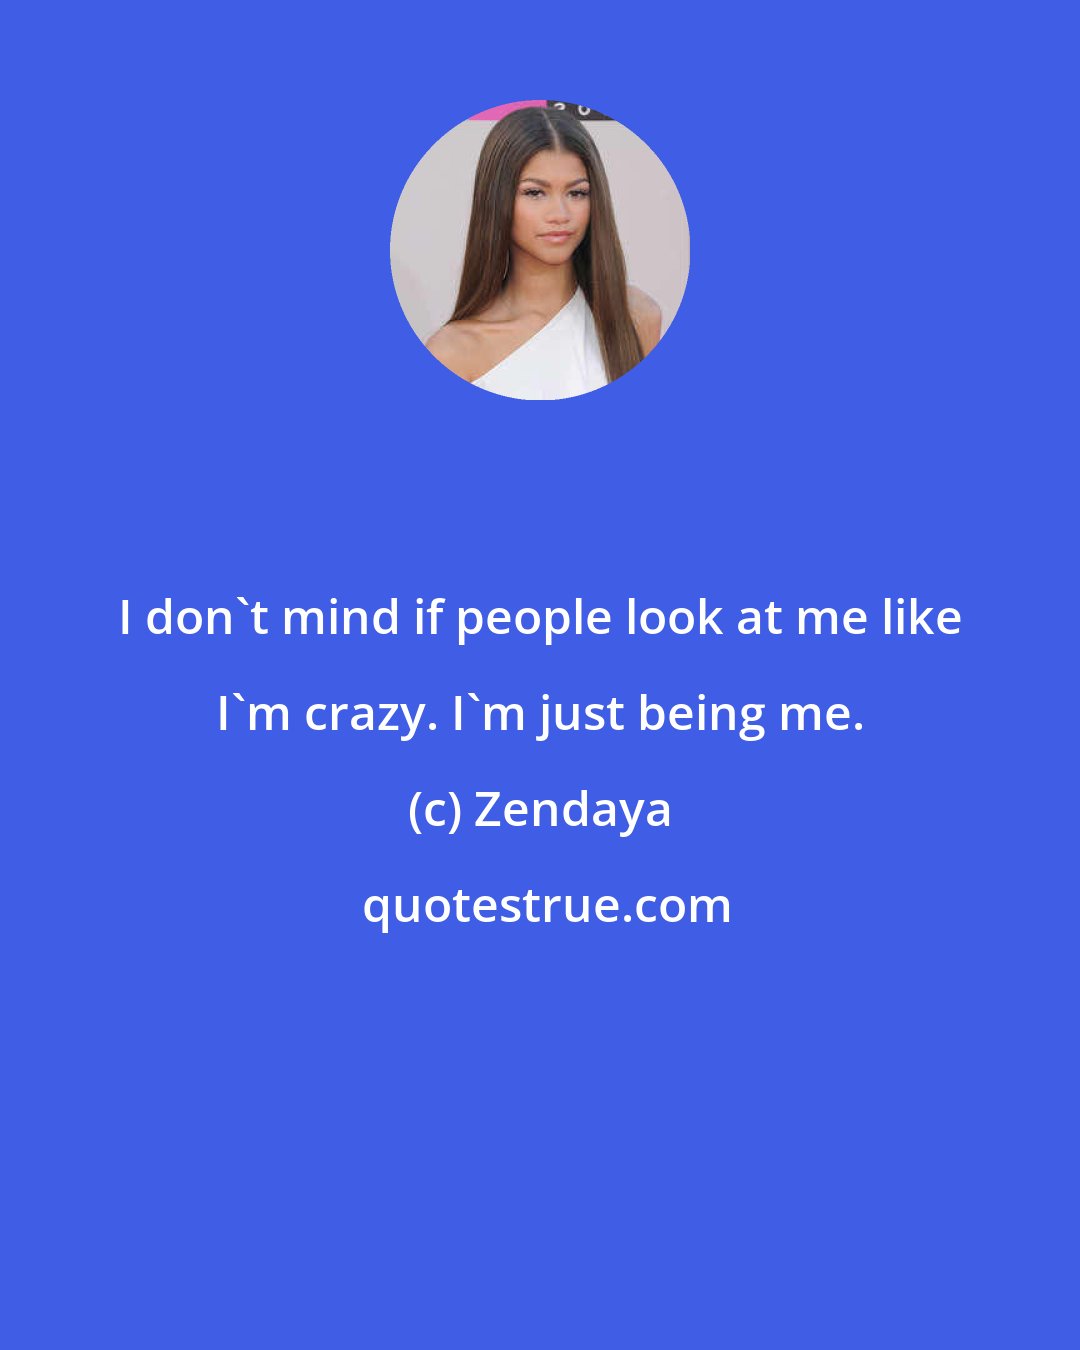 Zendaya: I don't mind if people look at me like I'm crazy. I'm just being me.